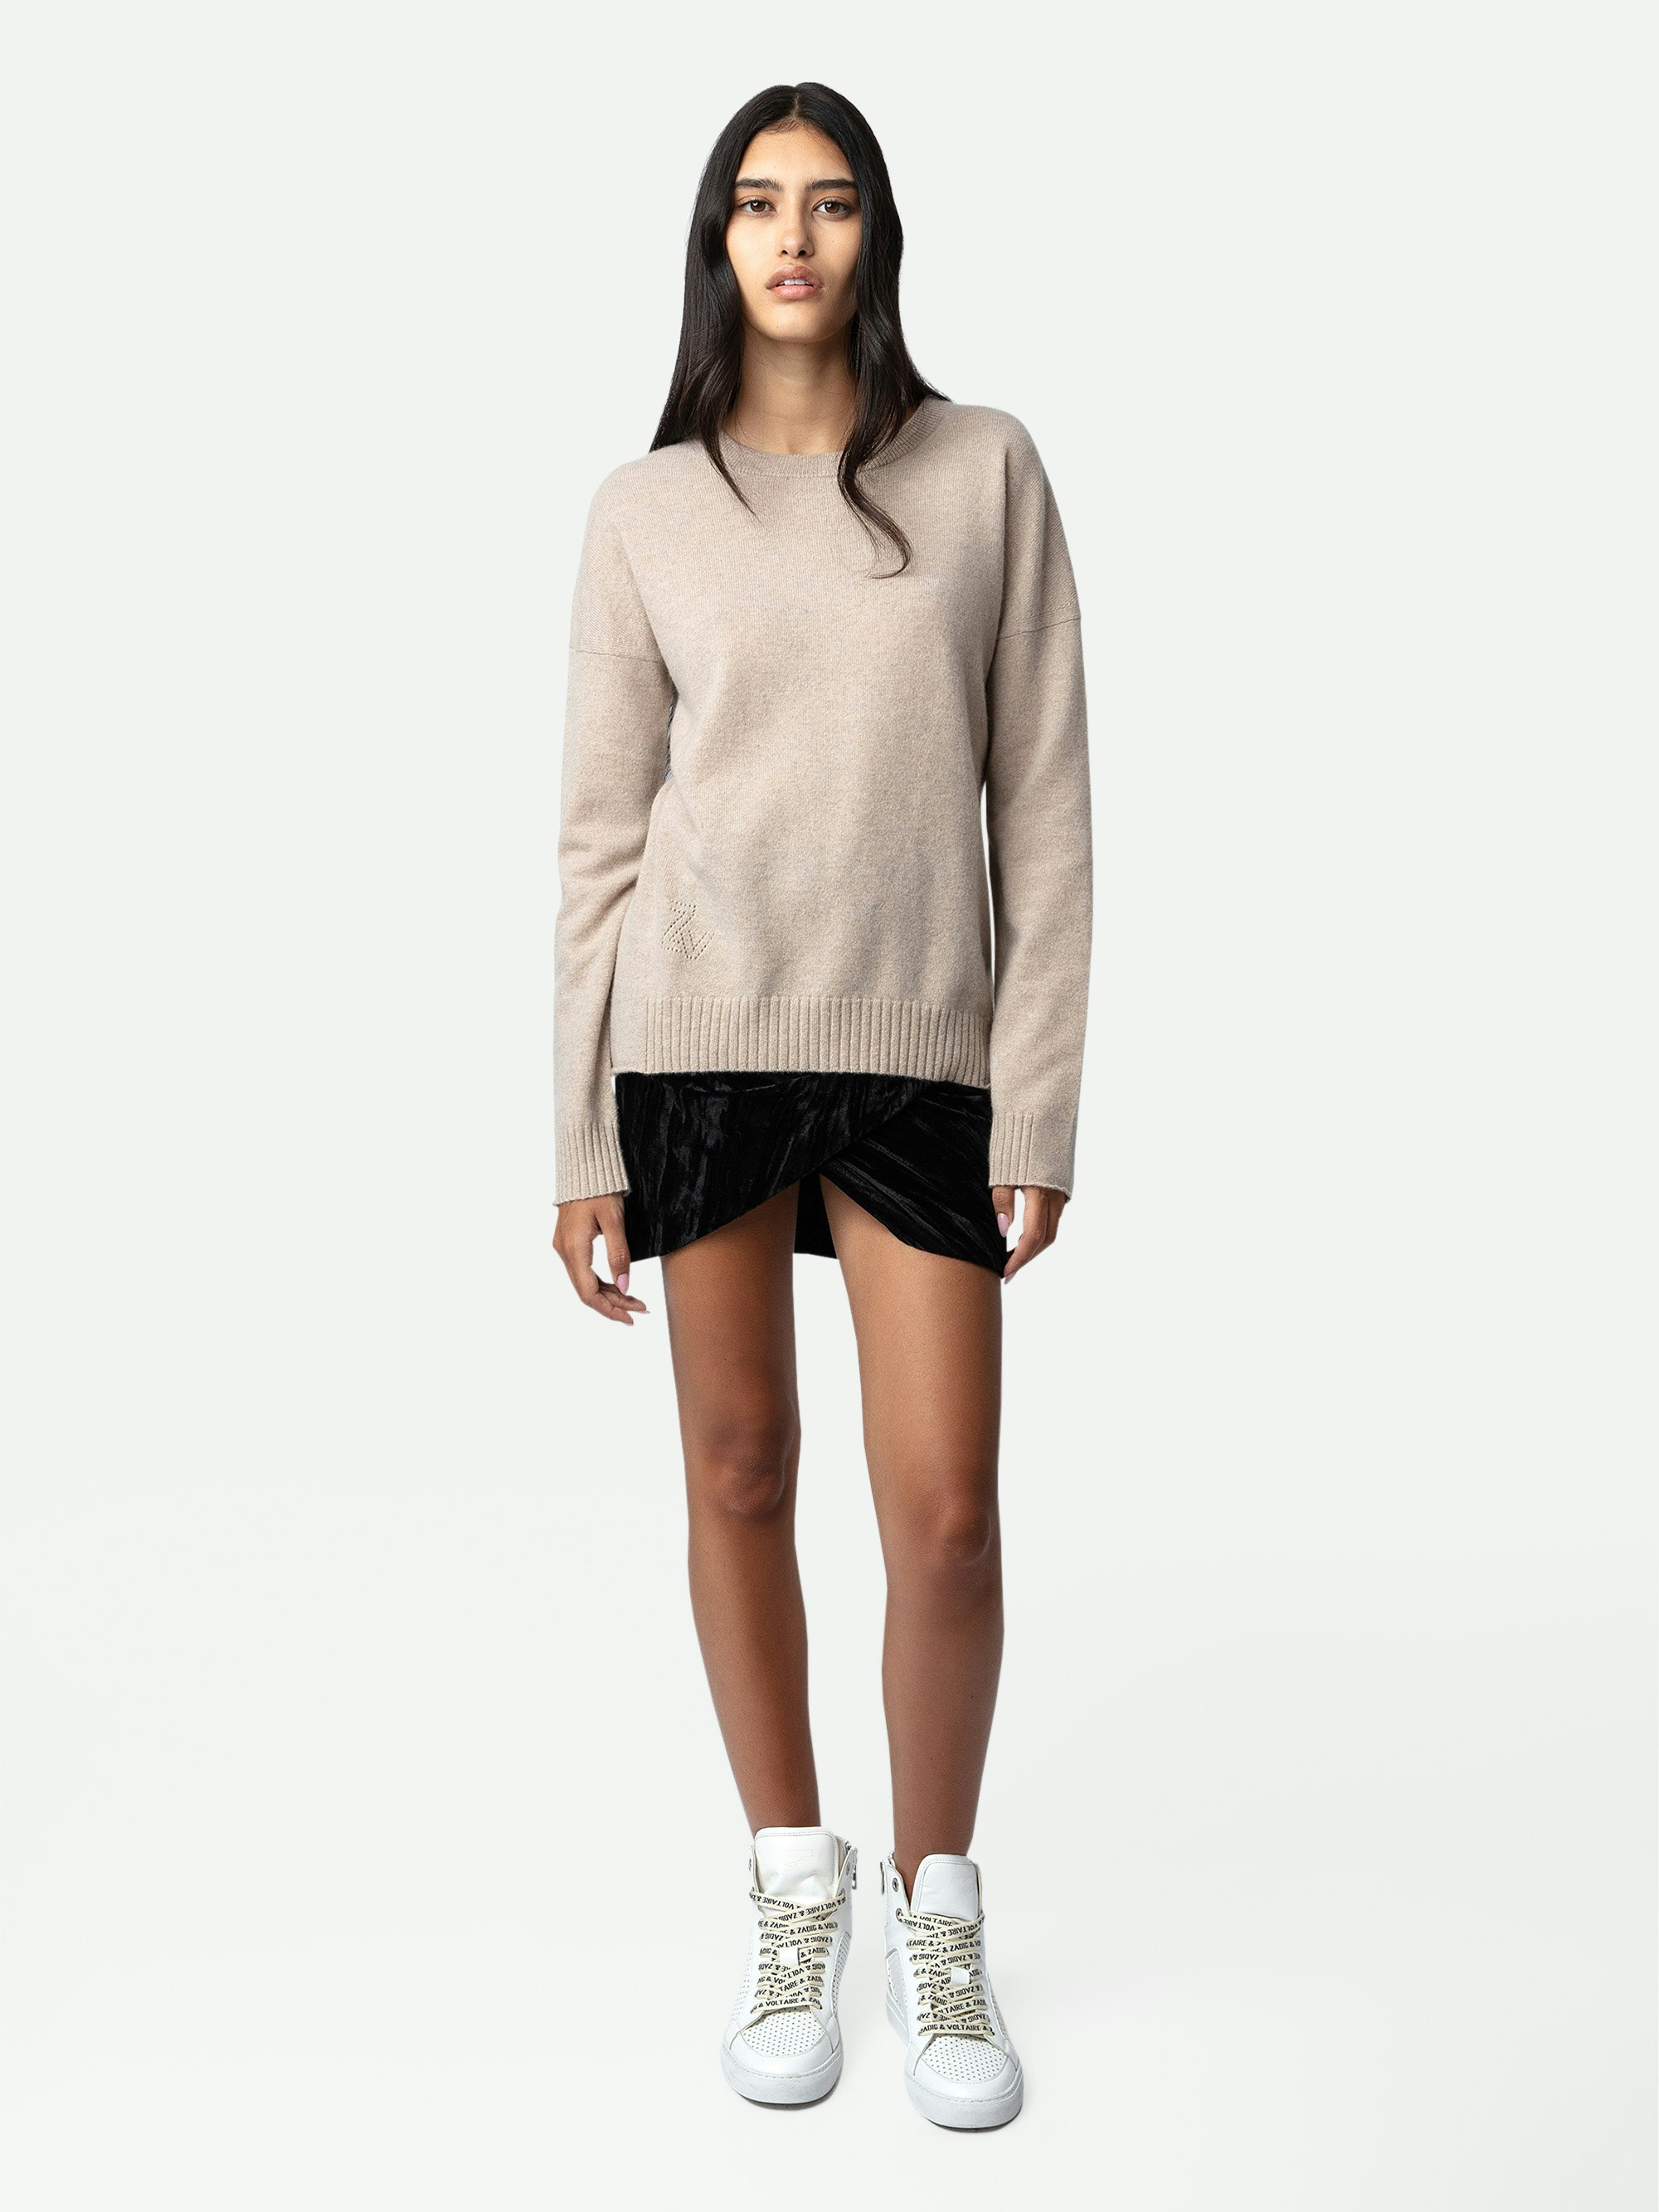 Cici Patch Cashmere Jumper - Women’s beige 100% cashmere jumper with embroidered star patch on the elbows.